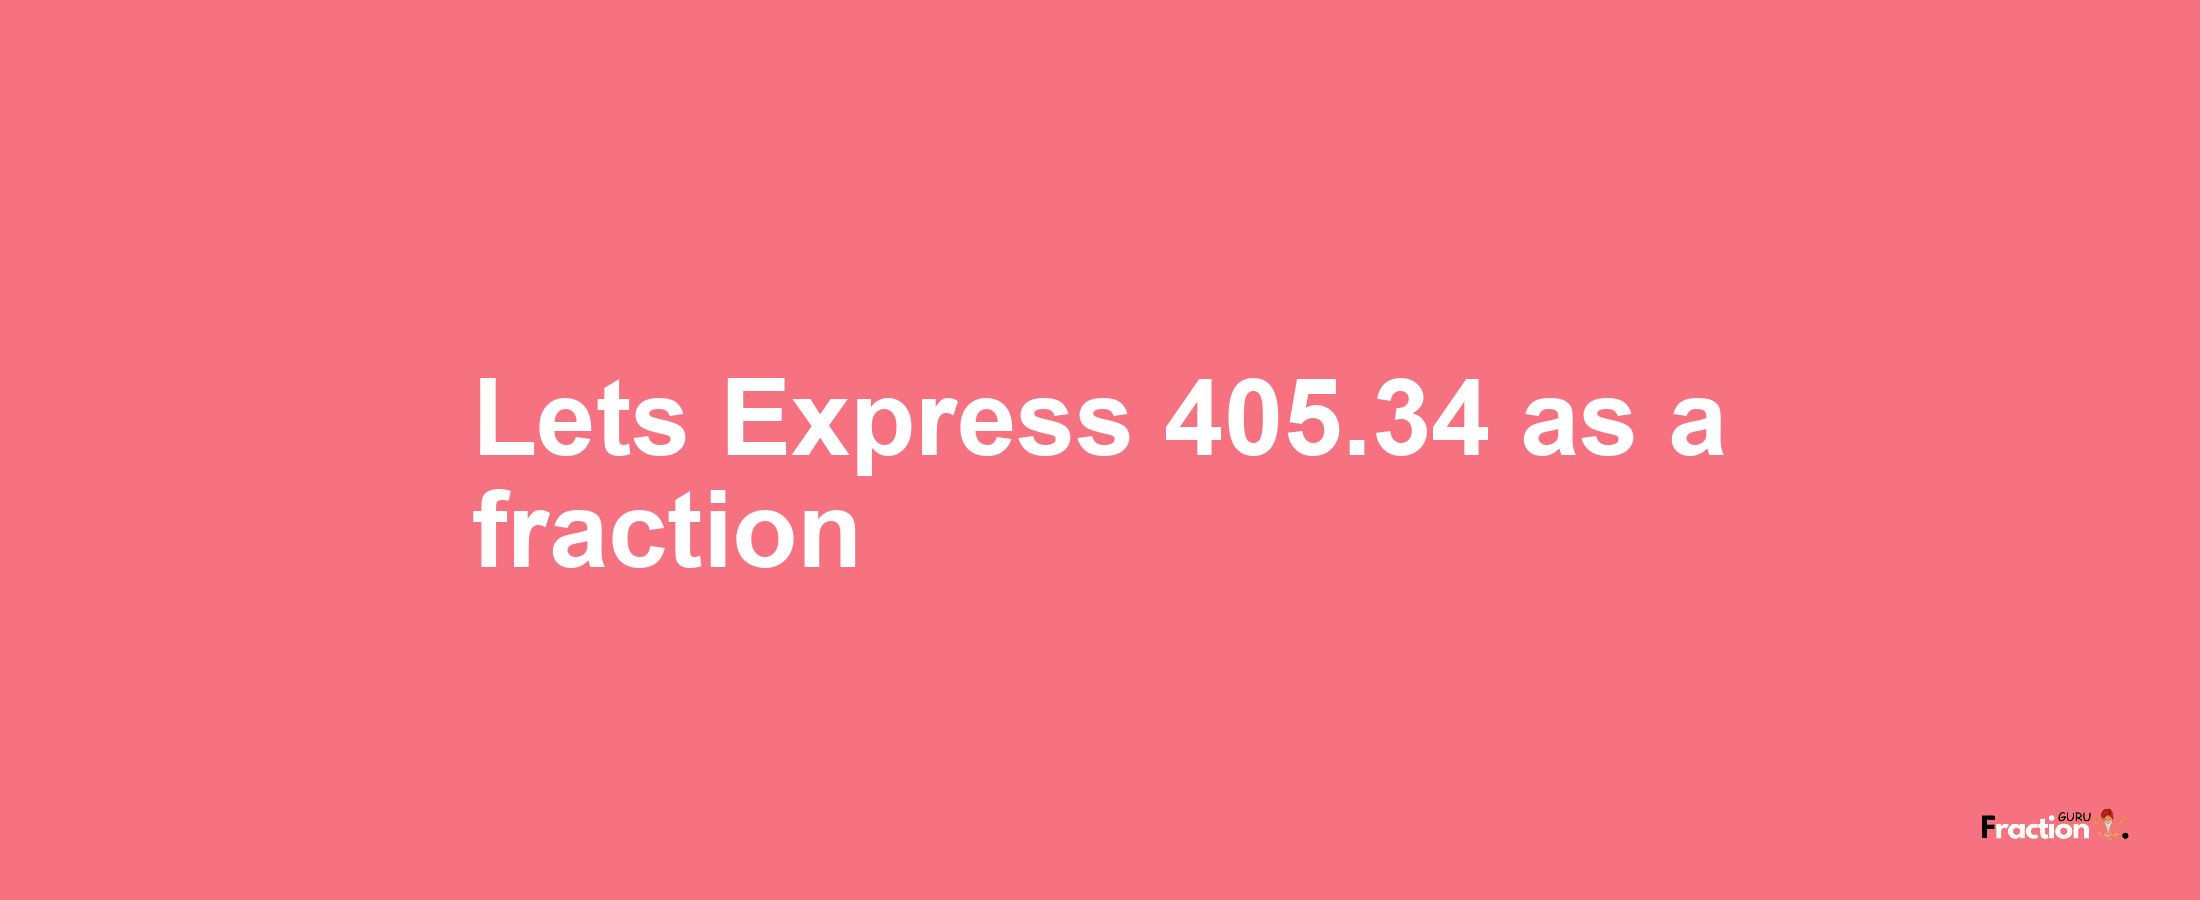 Lets Express 405.34 as afraction